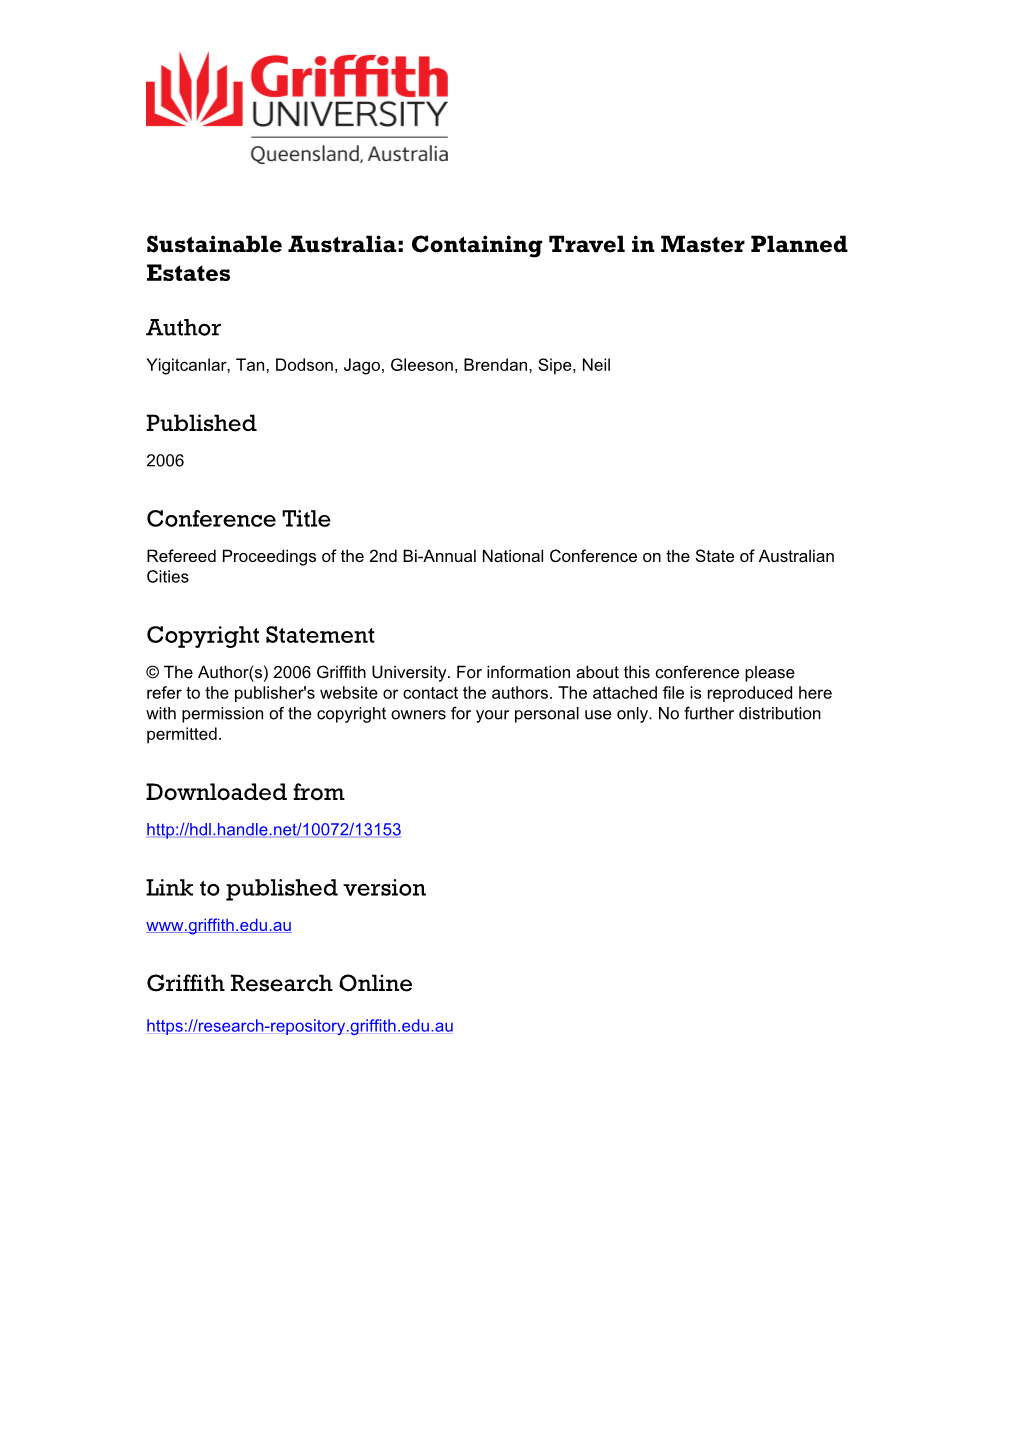 Sustainable Australia: Containing Travel in Master Planned Estates